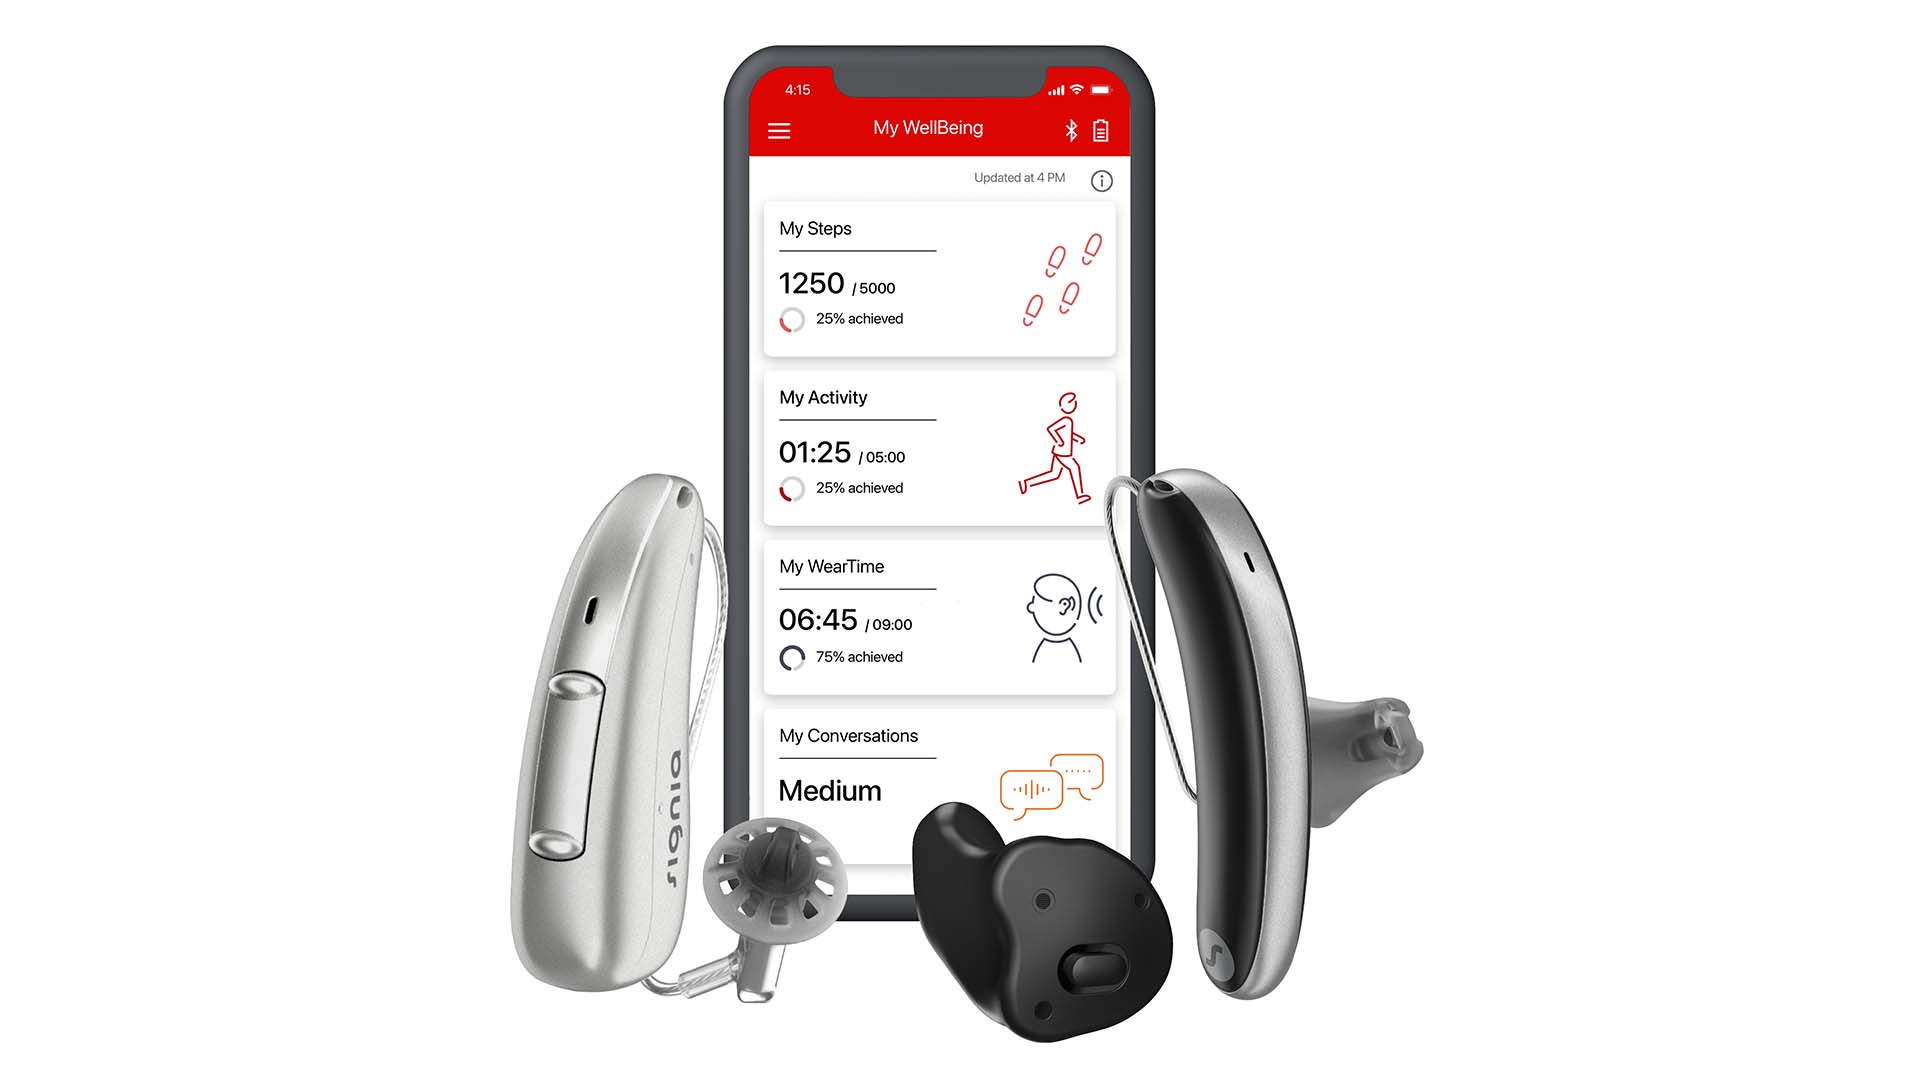 Signia app with My WellBeing screen and Signia AX hearing aids